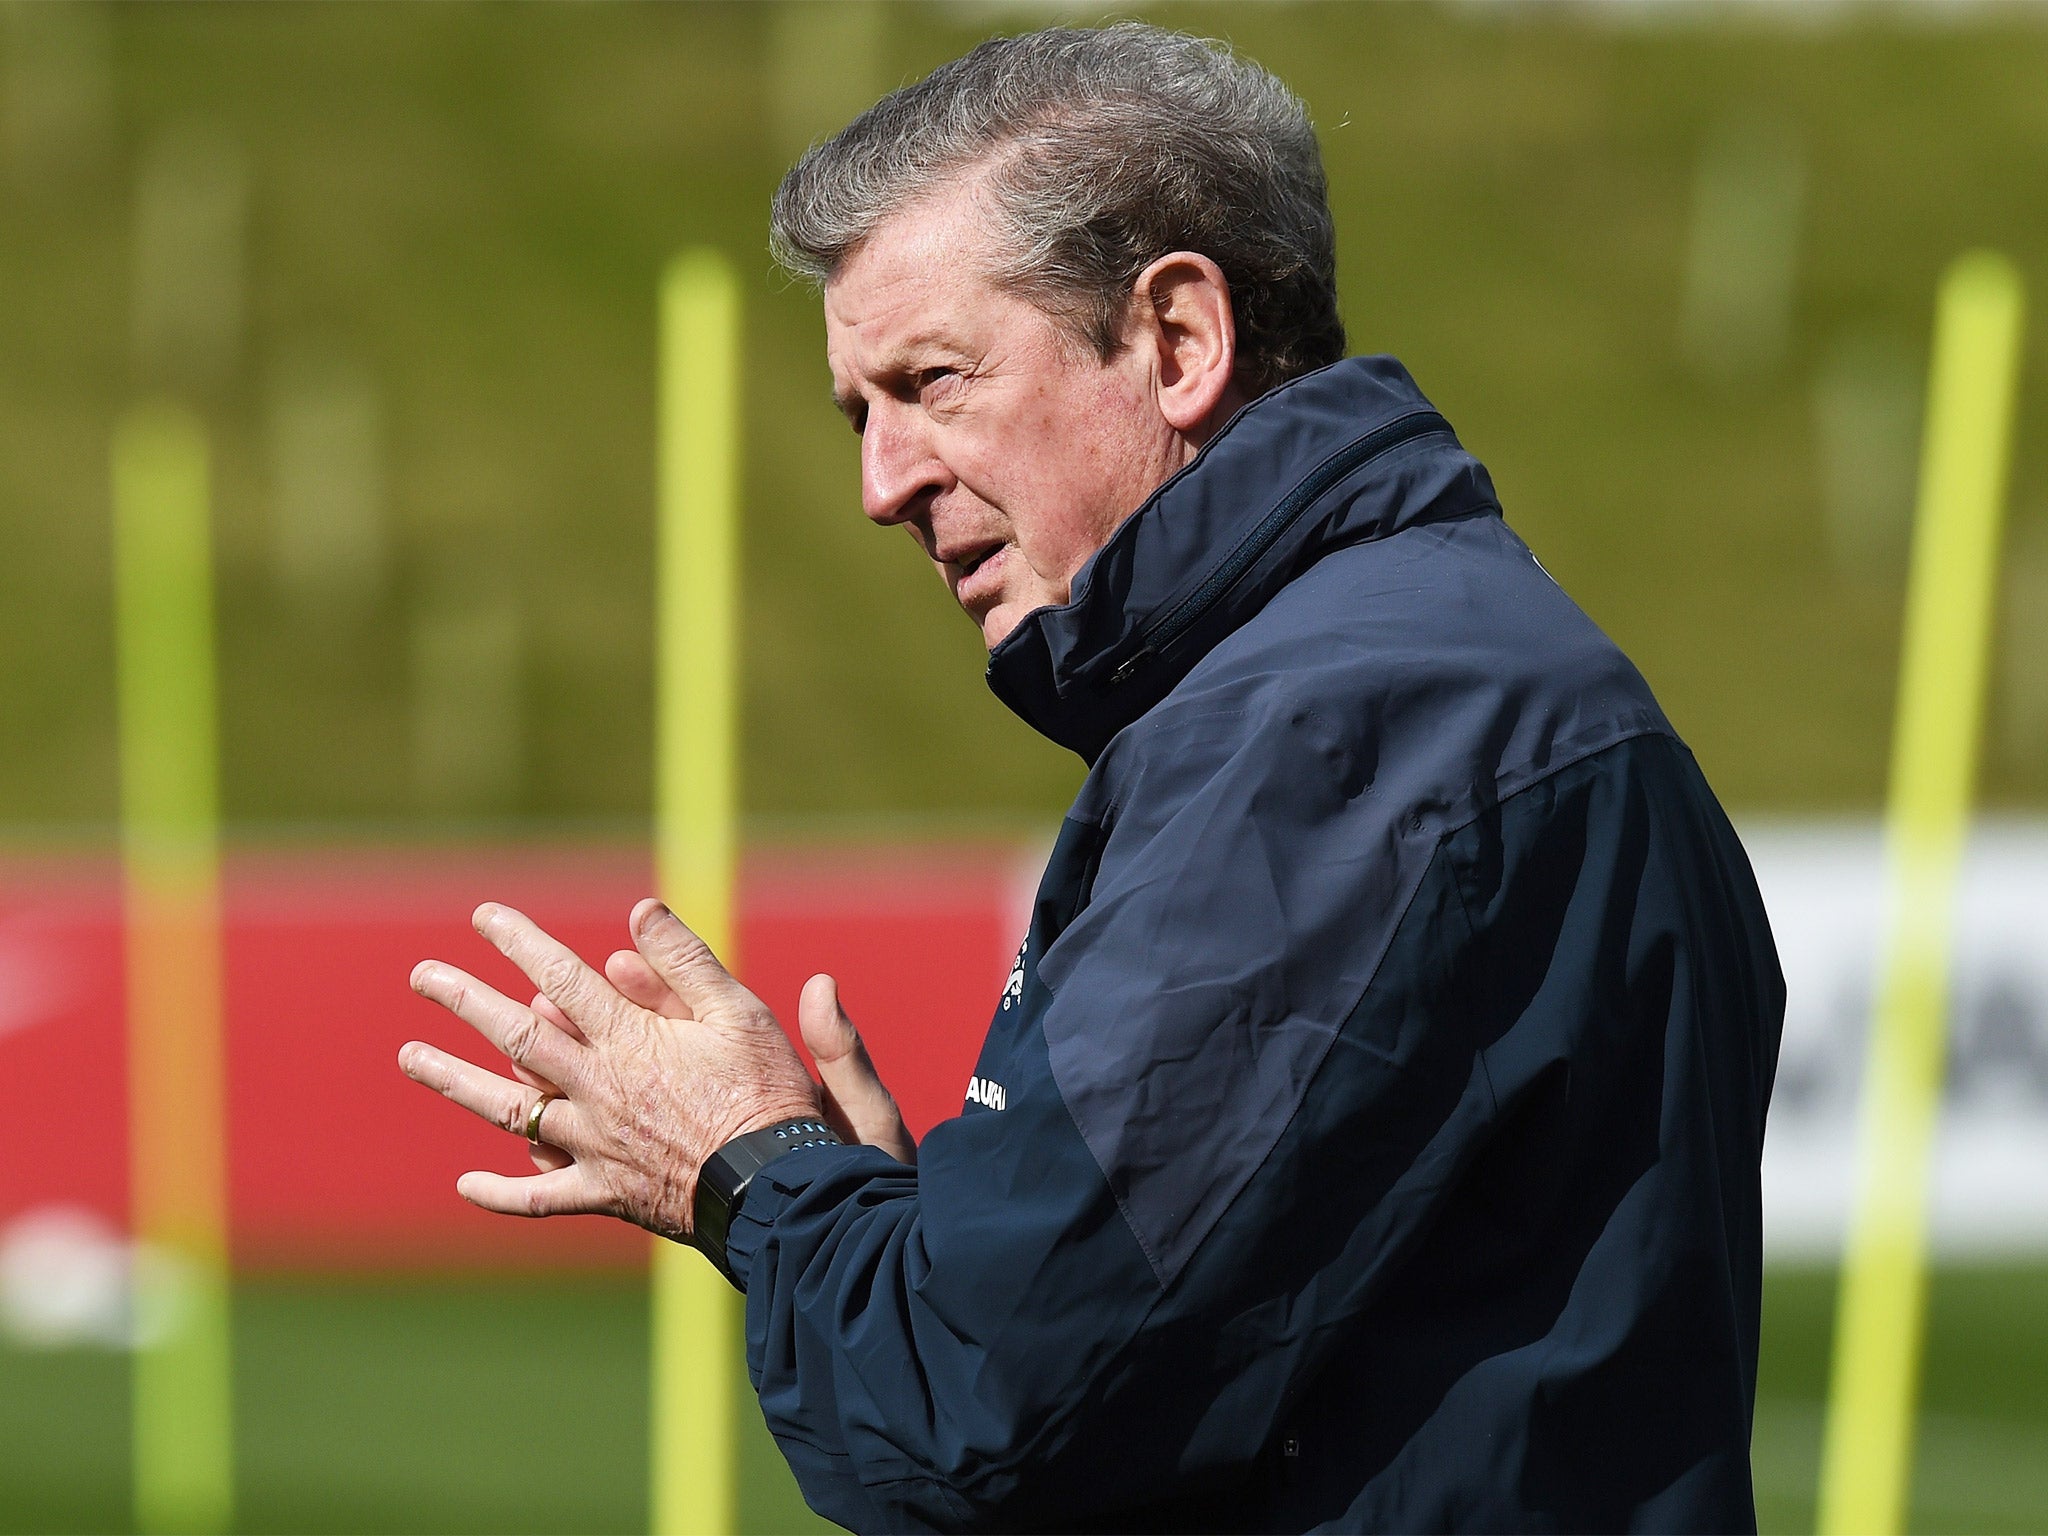 England manager Roy Hodgson looks on during a training session at St George's Park on Tuesday